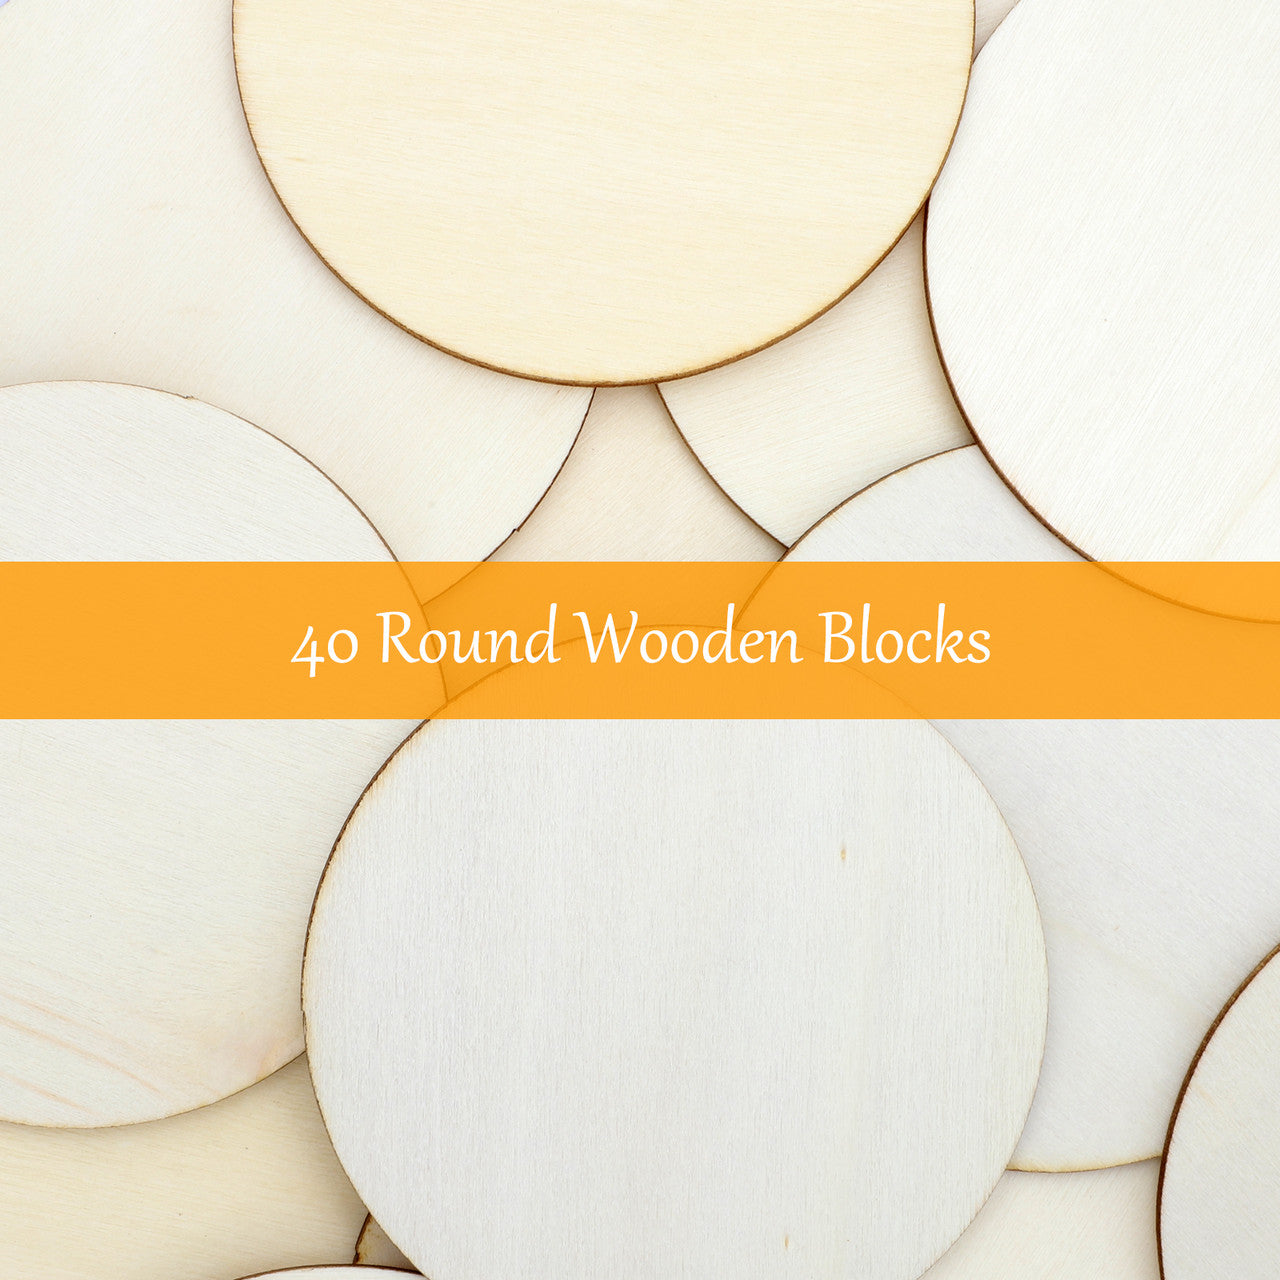 40 Pcs Log Round Wood Chips - 3 inch round wood pieces for crafts, custom game collages, prize tokens, photo decorations or custom coasters